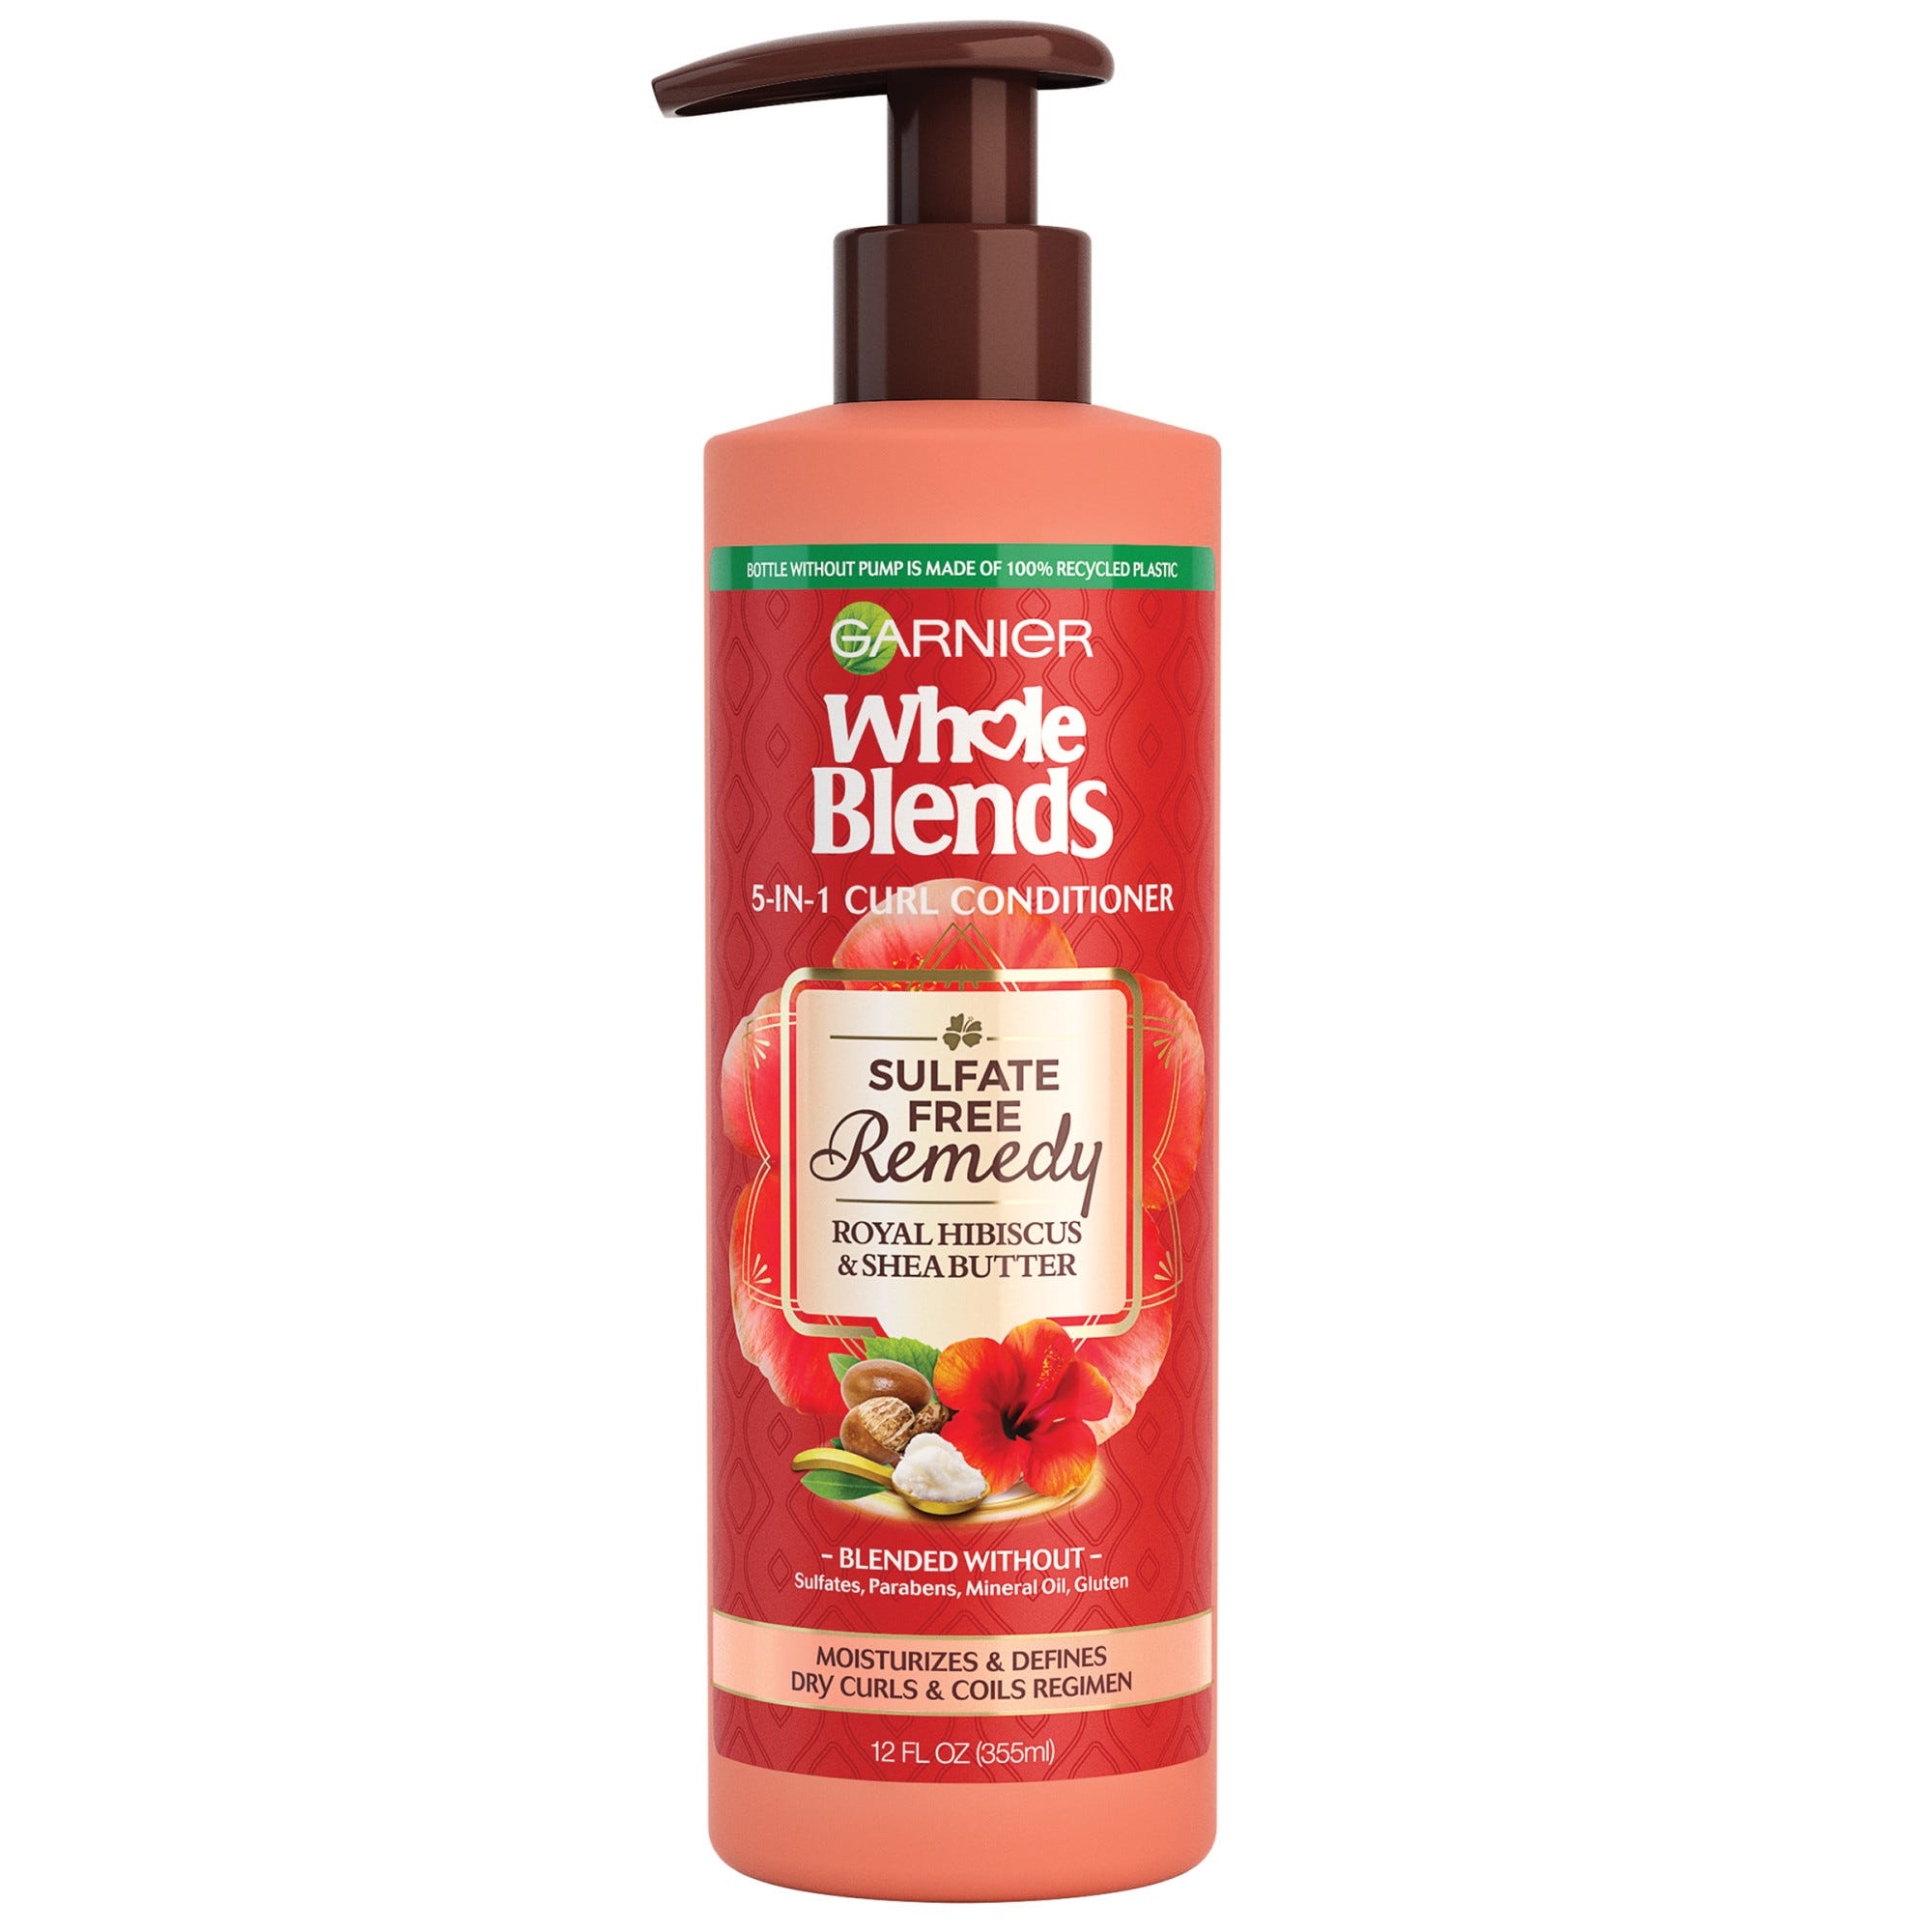 Garnier Whole Blends Sulfate Free Remedy Hibiscus and Shea Conditioner, Dry Curls - 12 fl oz